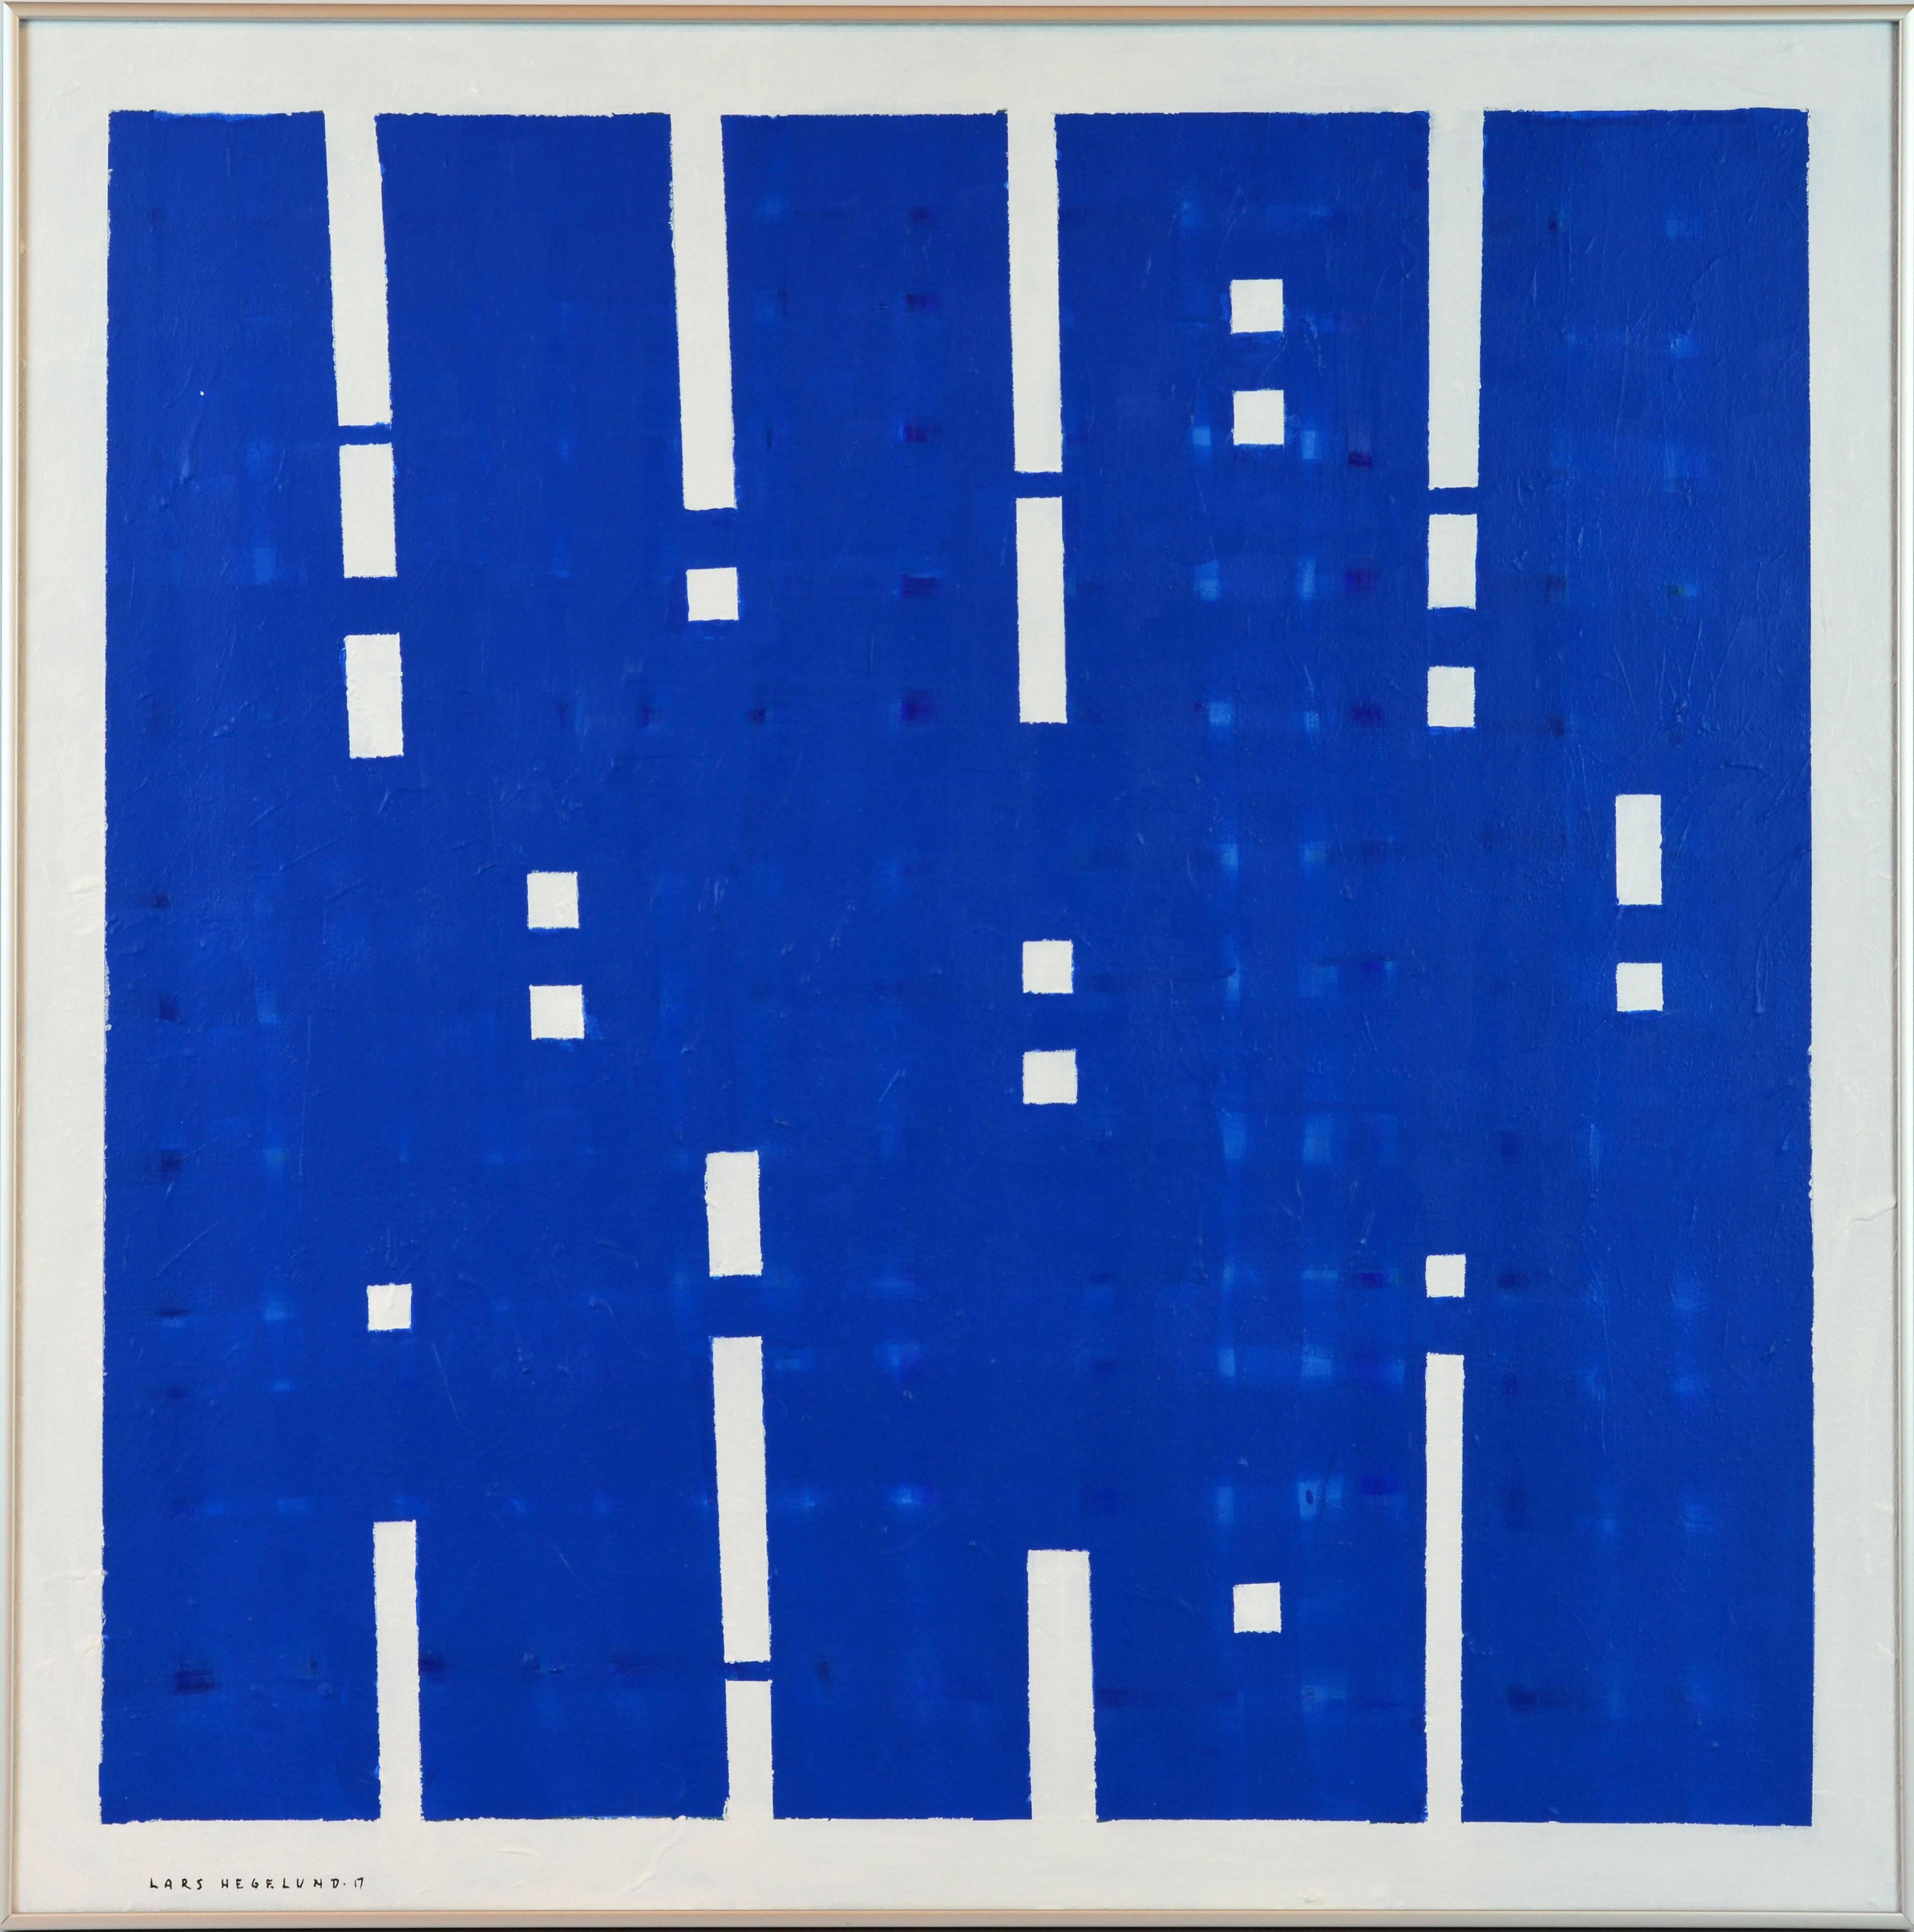 'Light's On'
by Lars Hegelund, American, b. 1947.
Measures: 30 x 30 in without frame 31 x 31 in. including frame,
Acrylic on canvas, signed.
Housed in a Minimalist style brushed aluminium frame.

About Lars Hegelund:
Lars Hegelund graduated